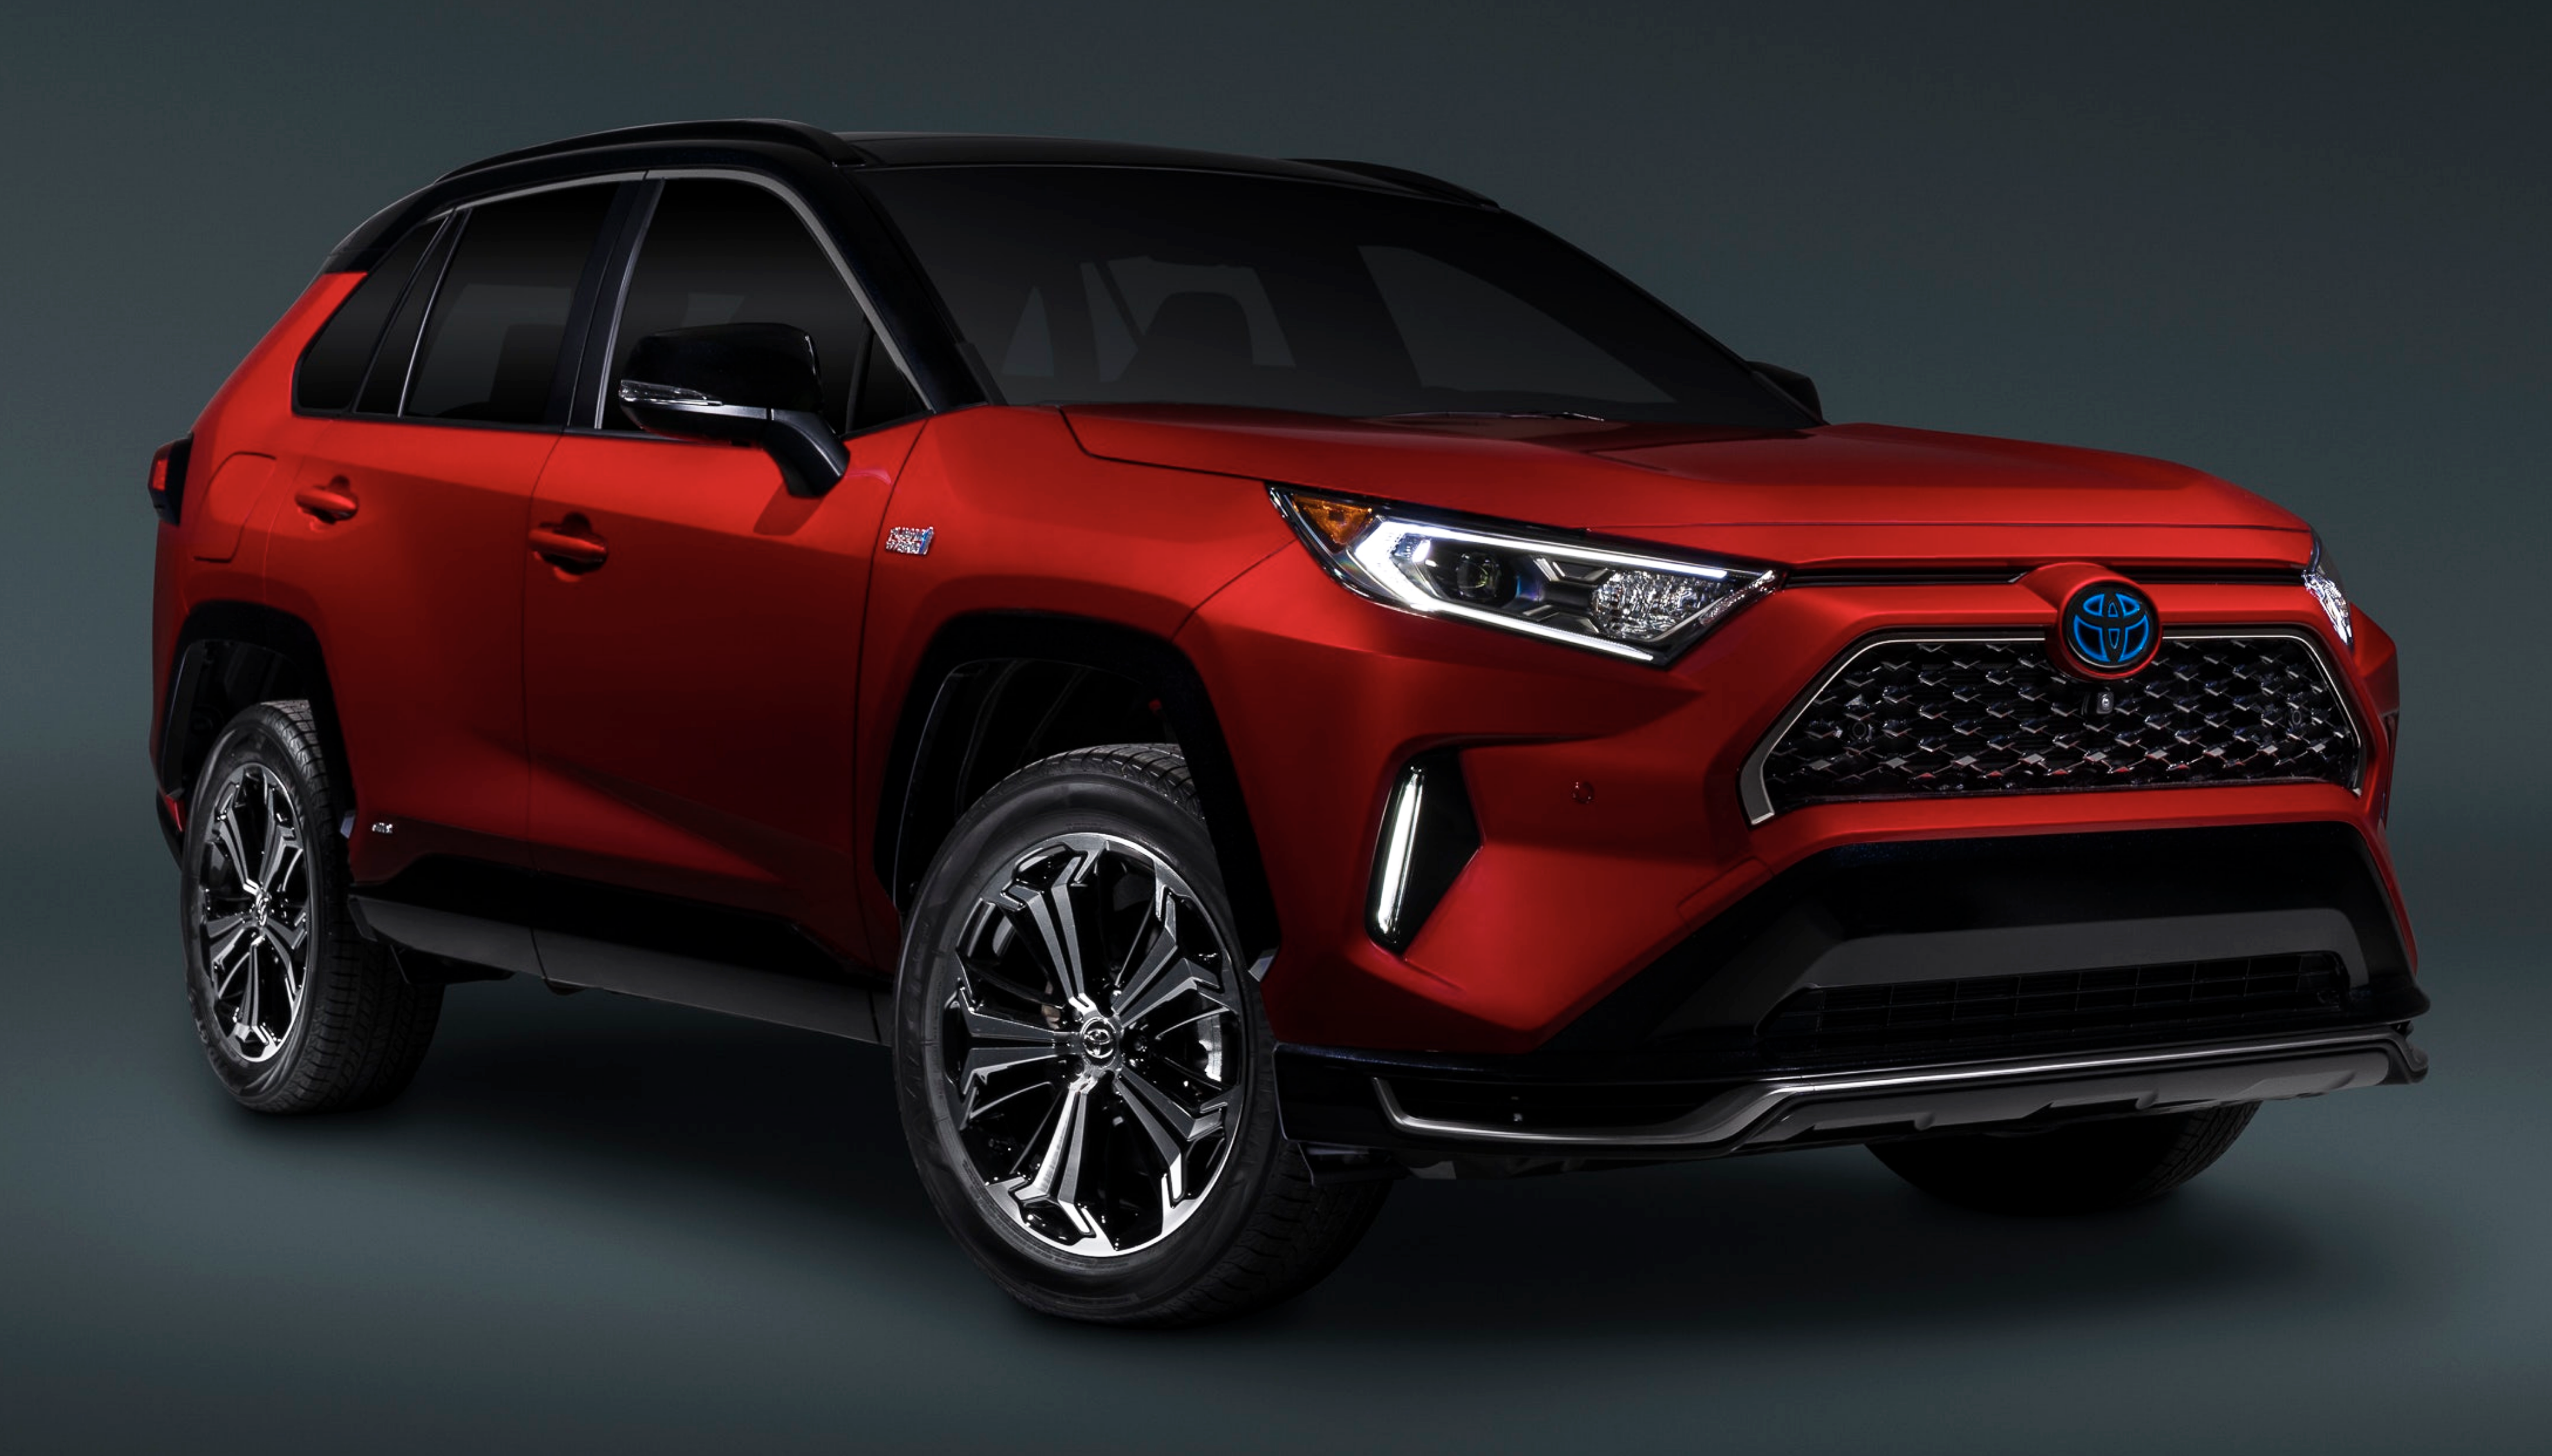 2019 Los Angeles Auto Show: 2021 Toyota RAV4 Prime | The Daily Drive | Consumer Guide® The Daily